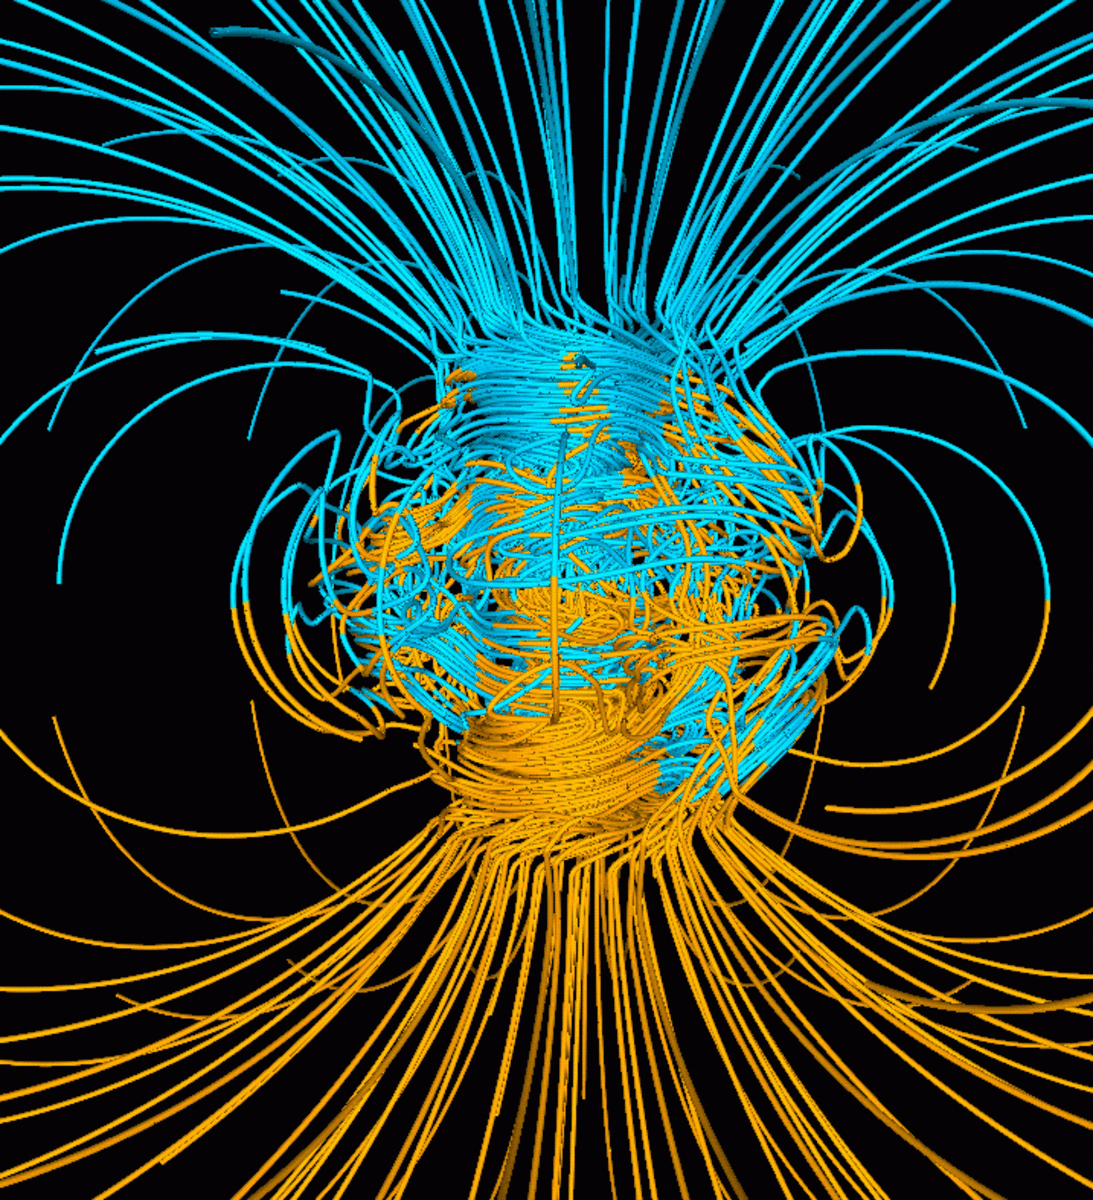 Computer simulation of the Earth's magnetic field in a period of normal polarity between reversals.